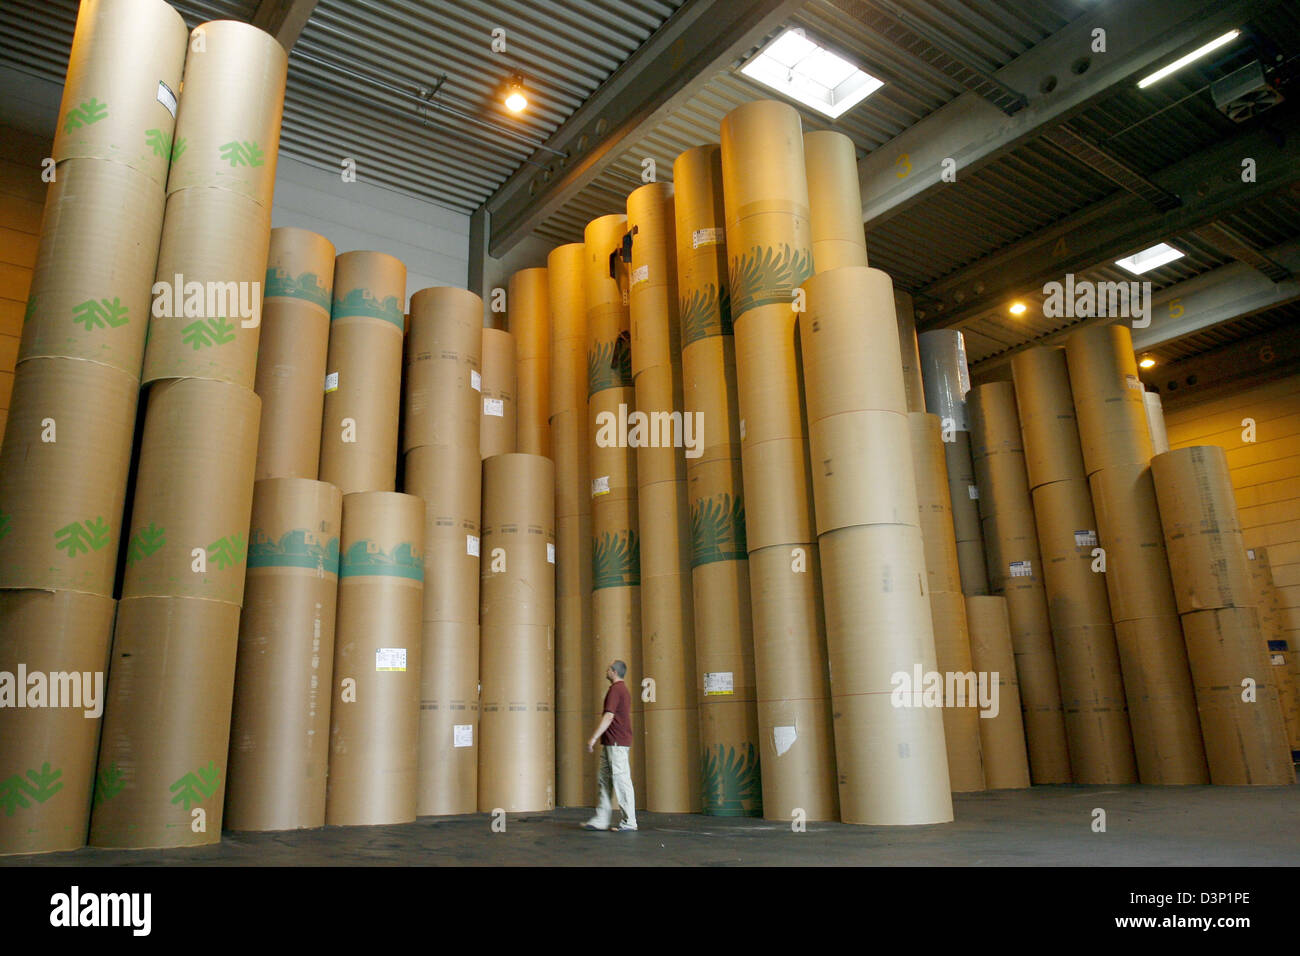 An employee checks stored paper rolls stacked up high in the Prinovis printing plant in Nuremberg, Germany, 27 June 2006. Prinovis is a joint-venture of publishing companies Bertelsmann, Gruner&Jahr and Springer and one of Europe's biggest rotogravure printing companies. Photo: Daniel Karmann Stock Photo